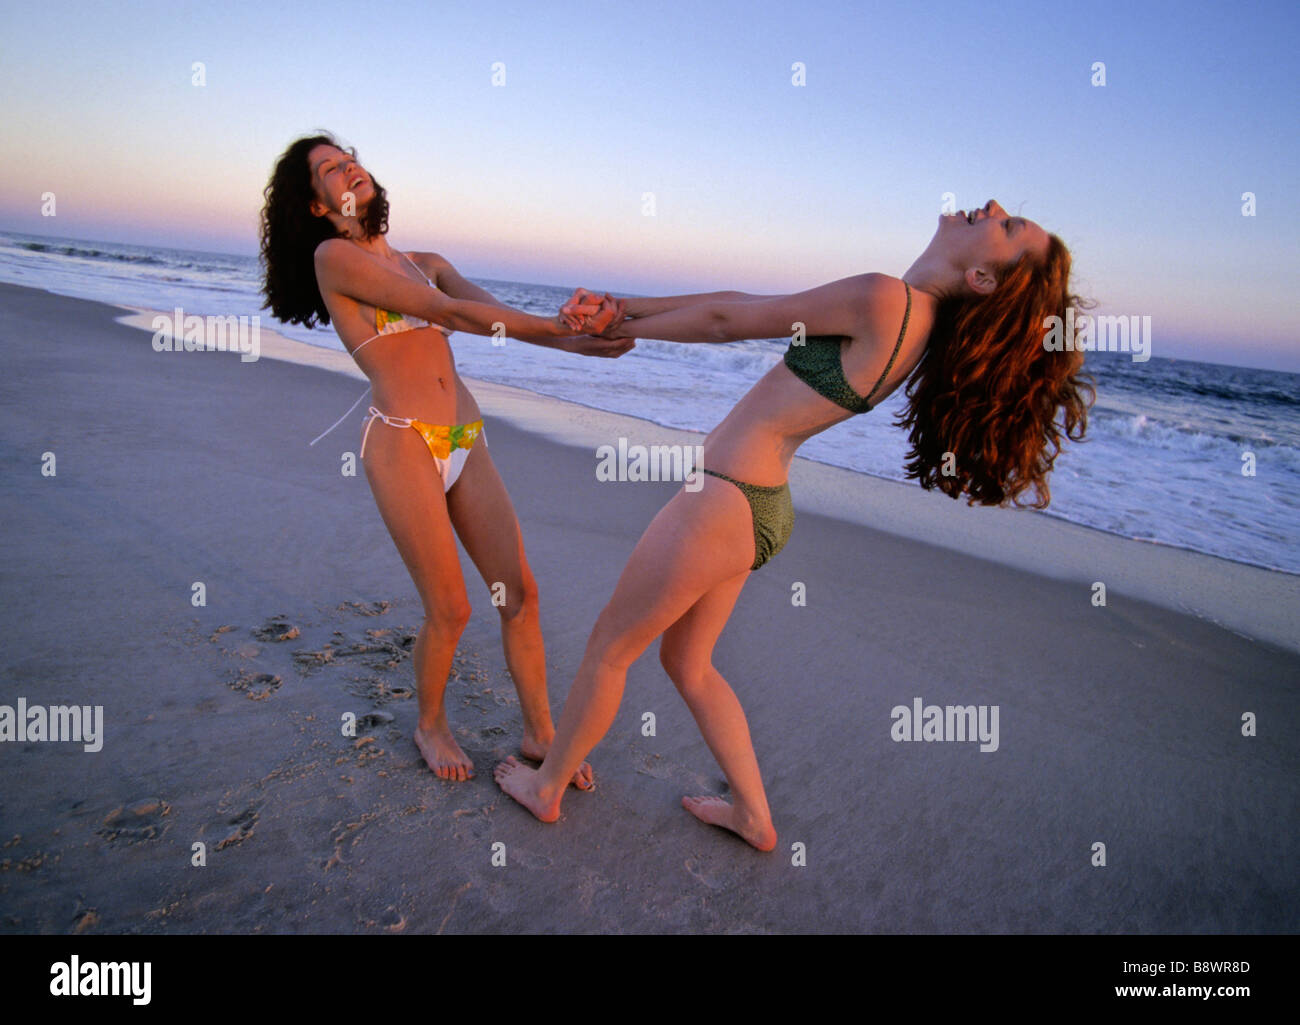 2 young girls at the beach having fun fighting Stock Photo - Alamy